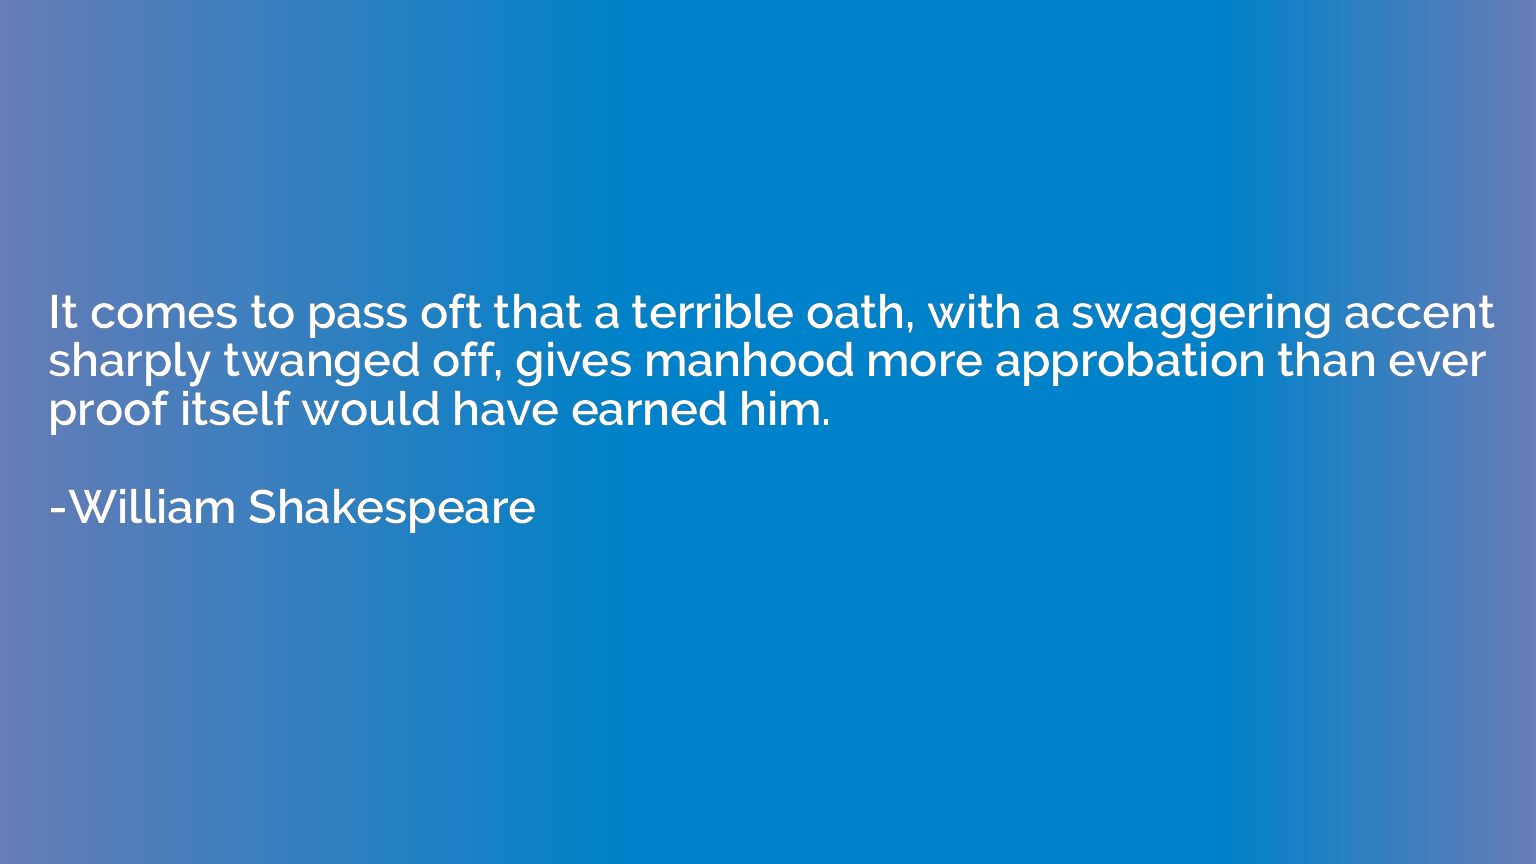 It comes to pass oft that a terrible oath, with a swaggering